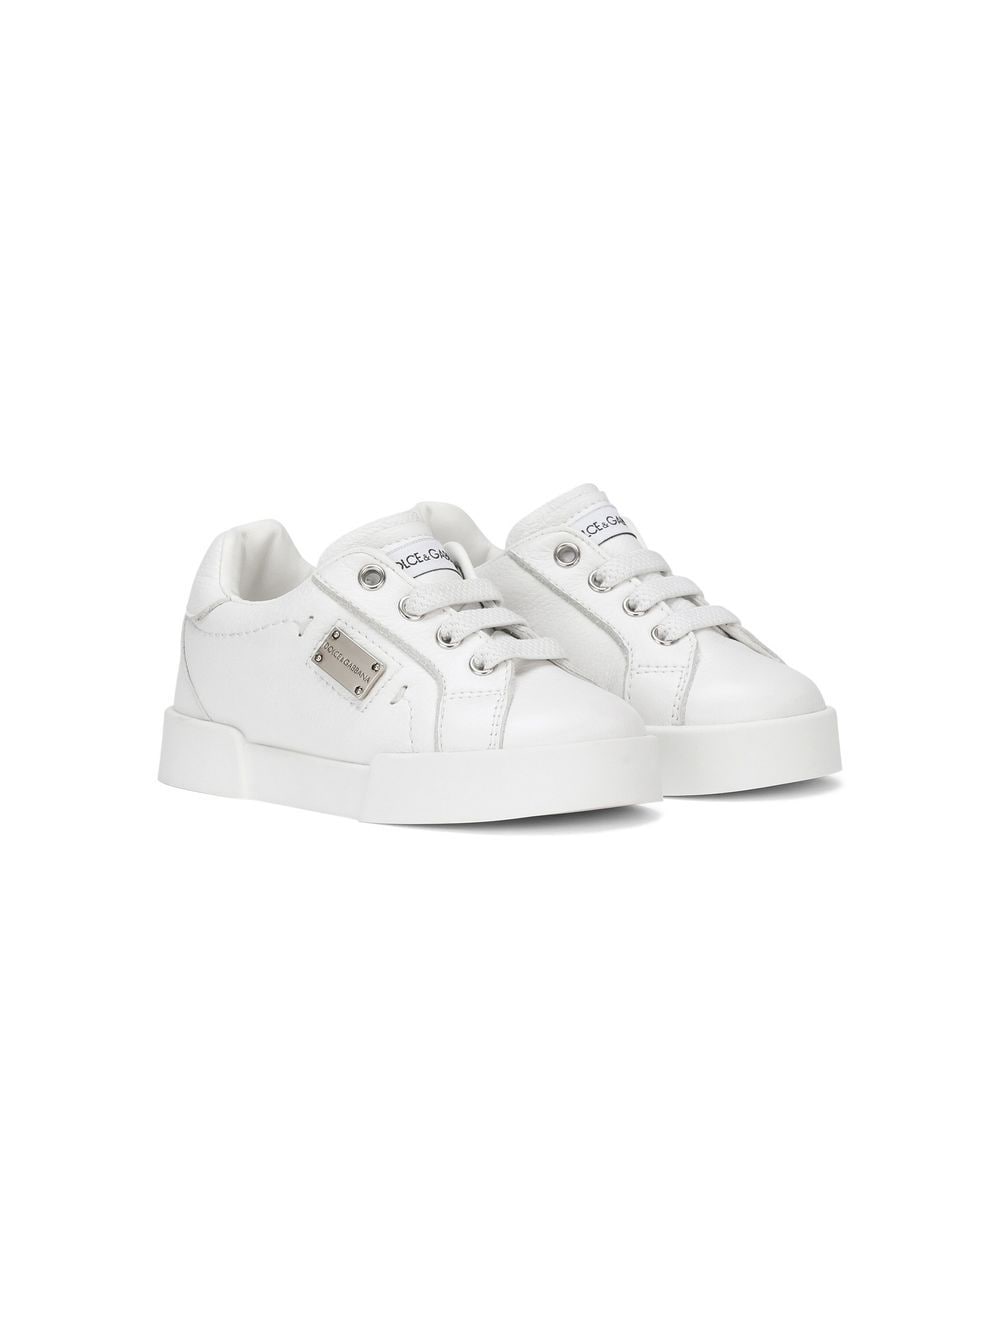 Dolce & Gabbana Kids' Logo Plaque Low-top Sneakers In White